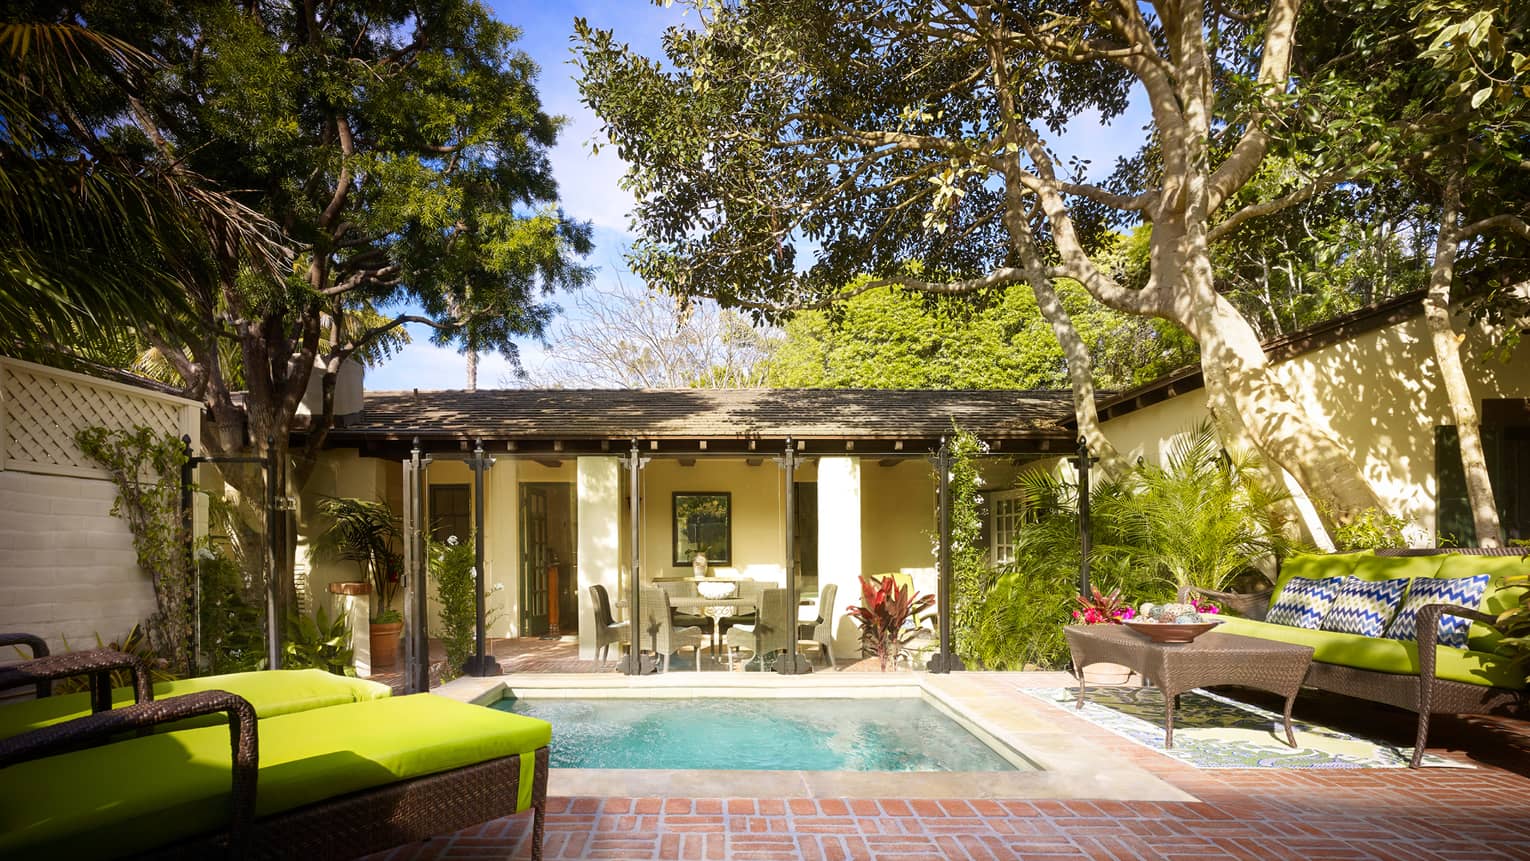 Bungalow backyard with plunge swimming pool, patio, wicker lounge chairs with green cushions